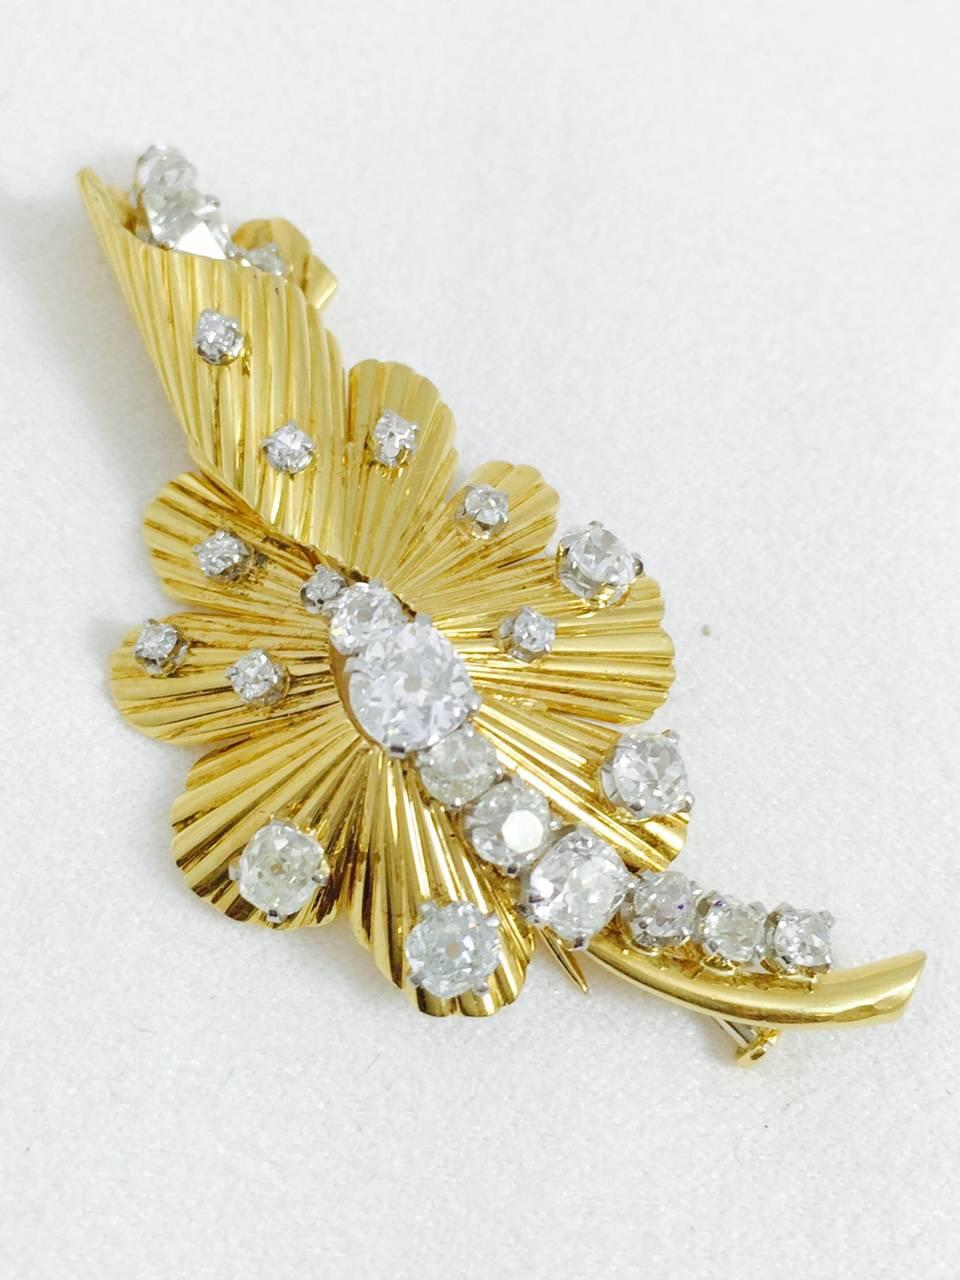 Artful ribbon work in 18 karat yellow gold forms the base for this stylish flower brooch.  An impressive approximate 5.50 carats total weight  of European Cut diamonds having E color, VS1 clarity.  Fantastic design.  Fabulous sparkle.  Brooches have